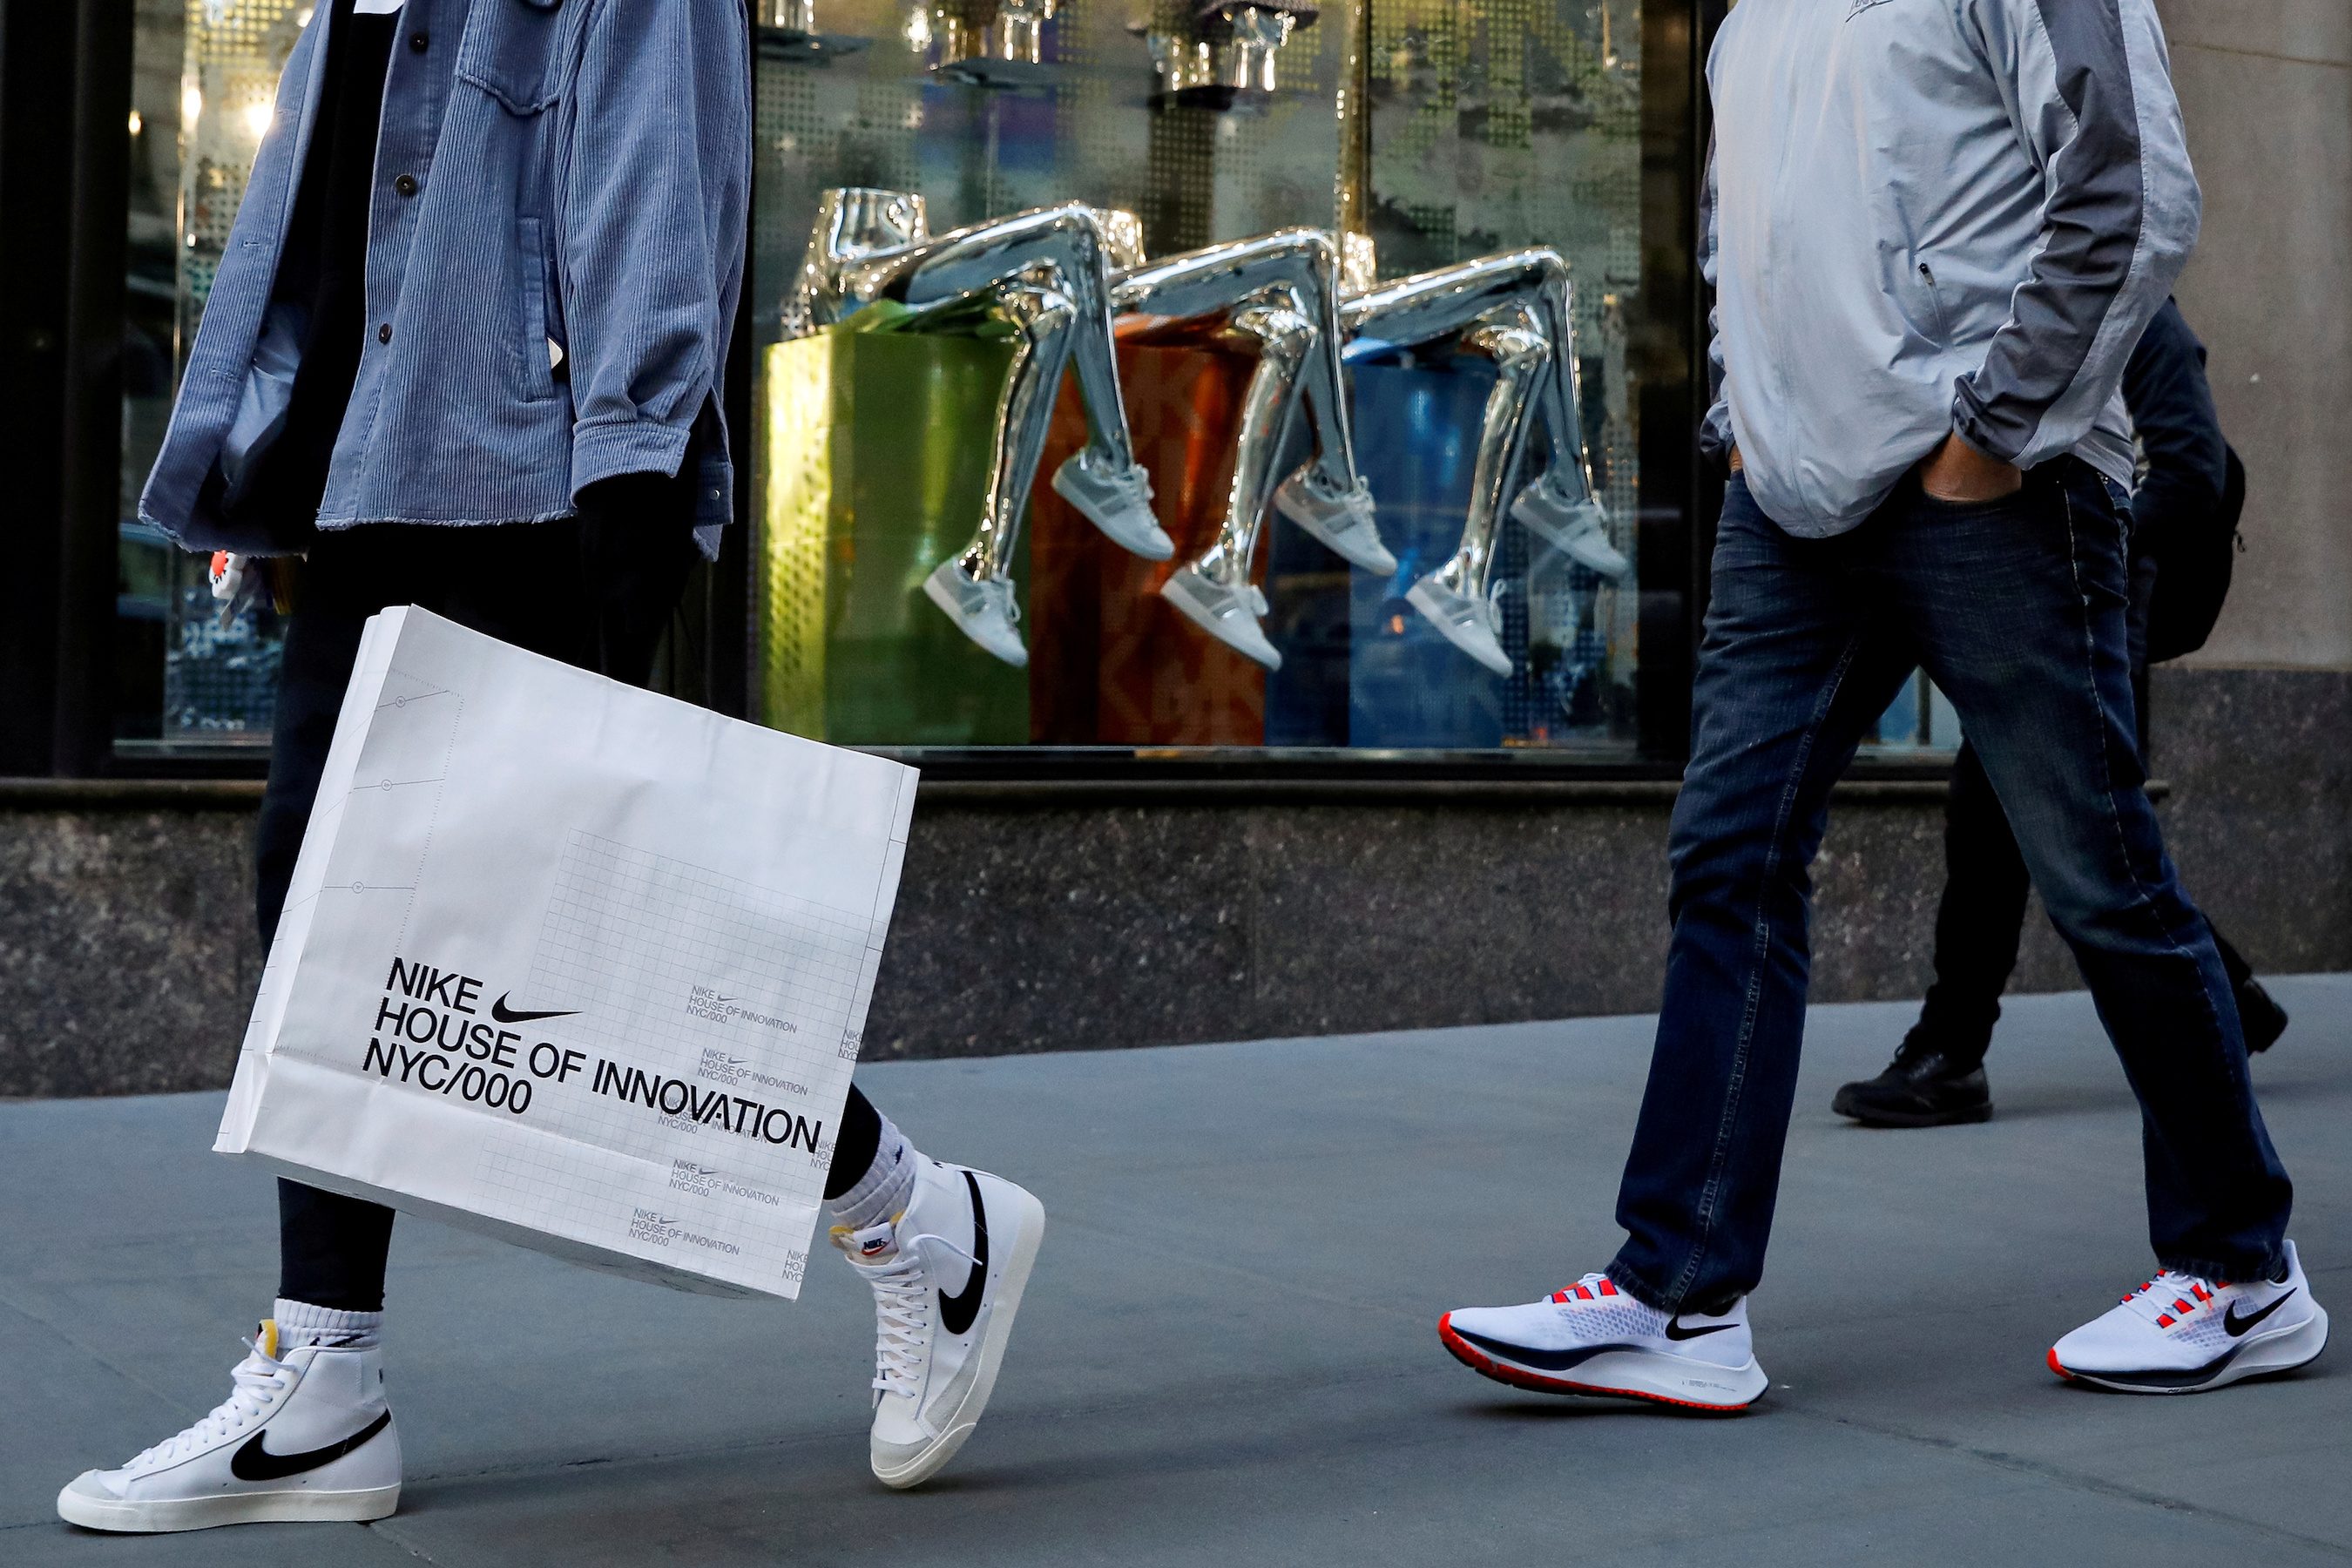 US consumer prices post biggest gain in over 8 years as economy reopens